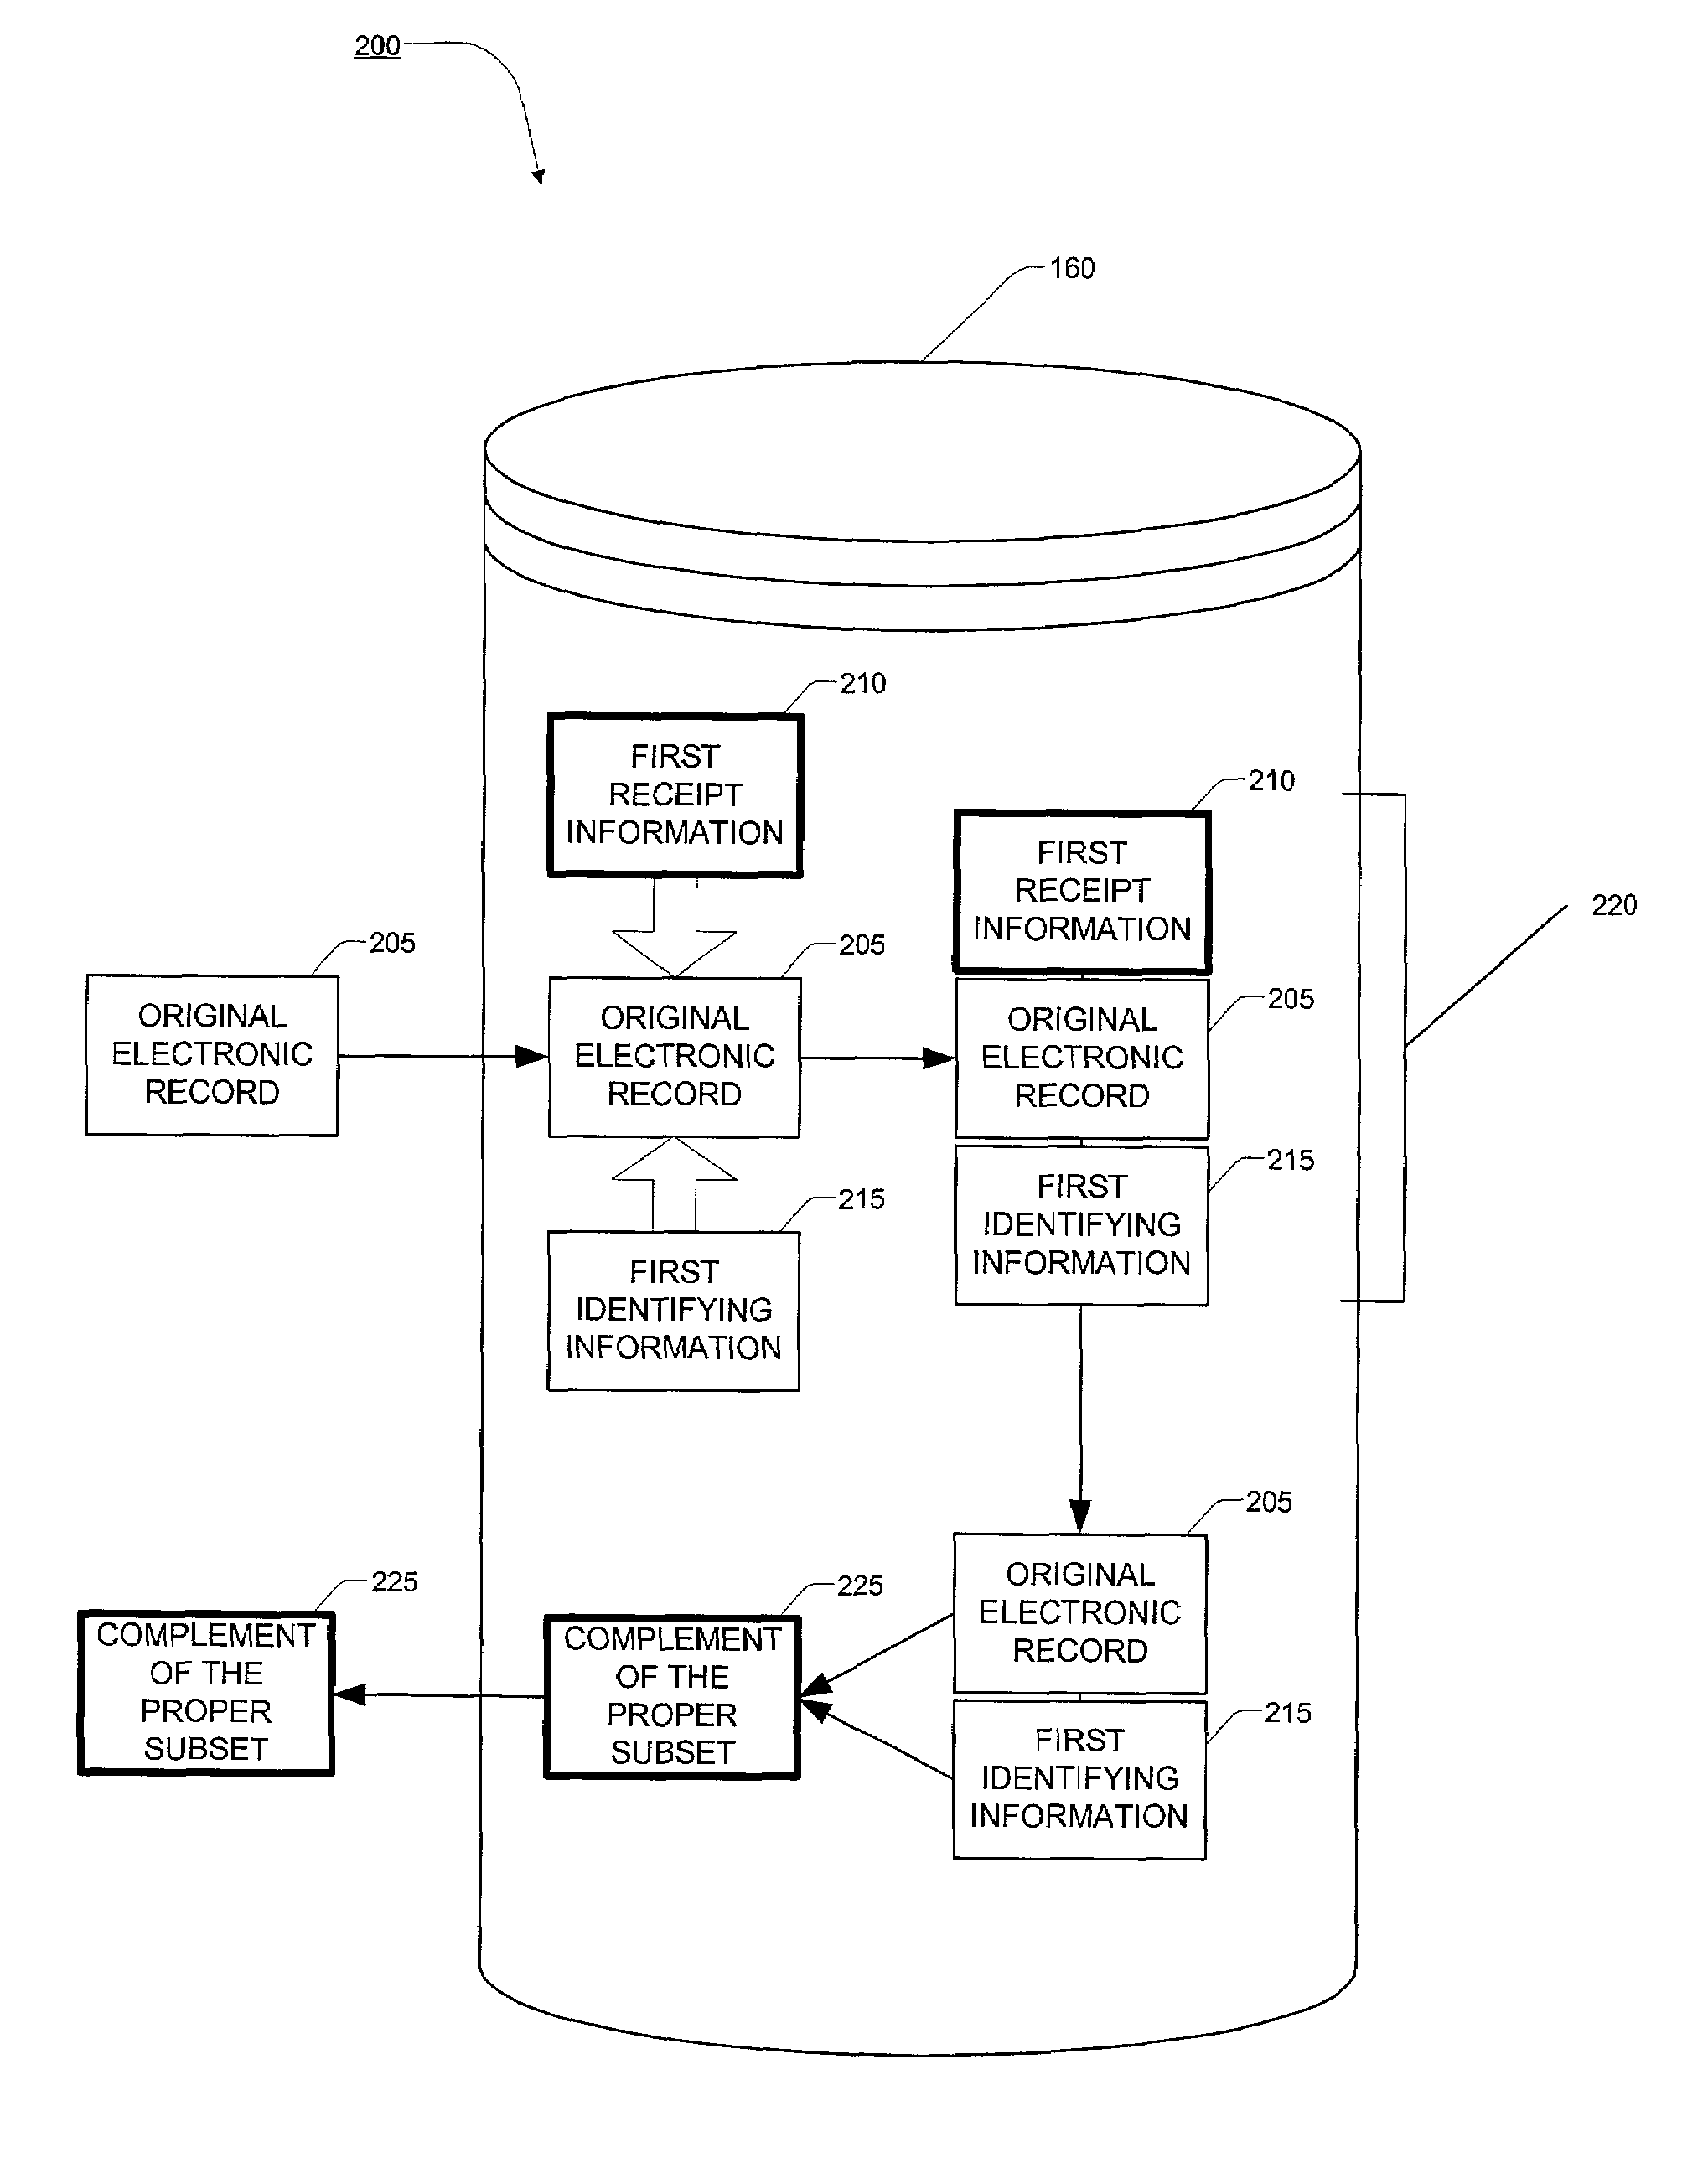 Systems and methods for obtaining digital signatures on a single authoritative copy of an original electronic record